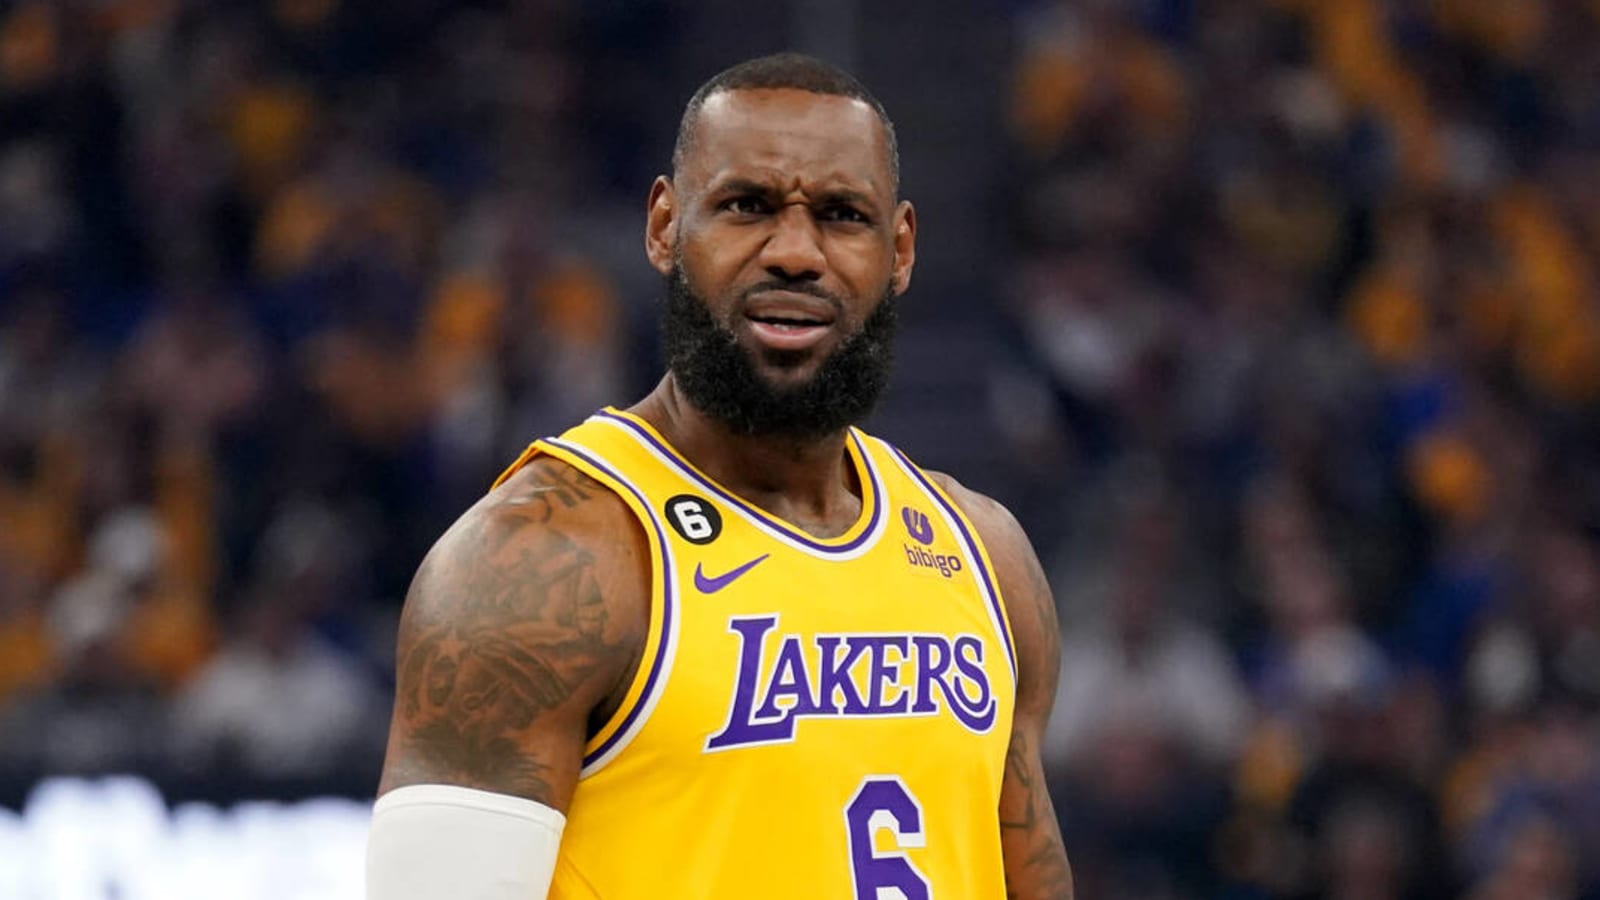 NBA MVP voting results in career-first for LeBron James